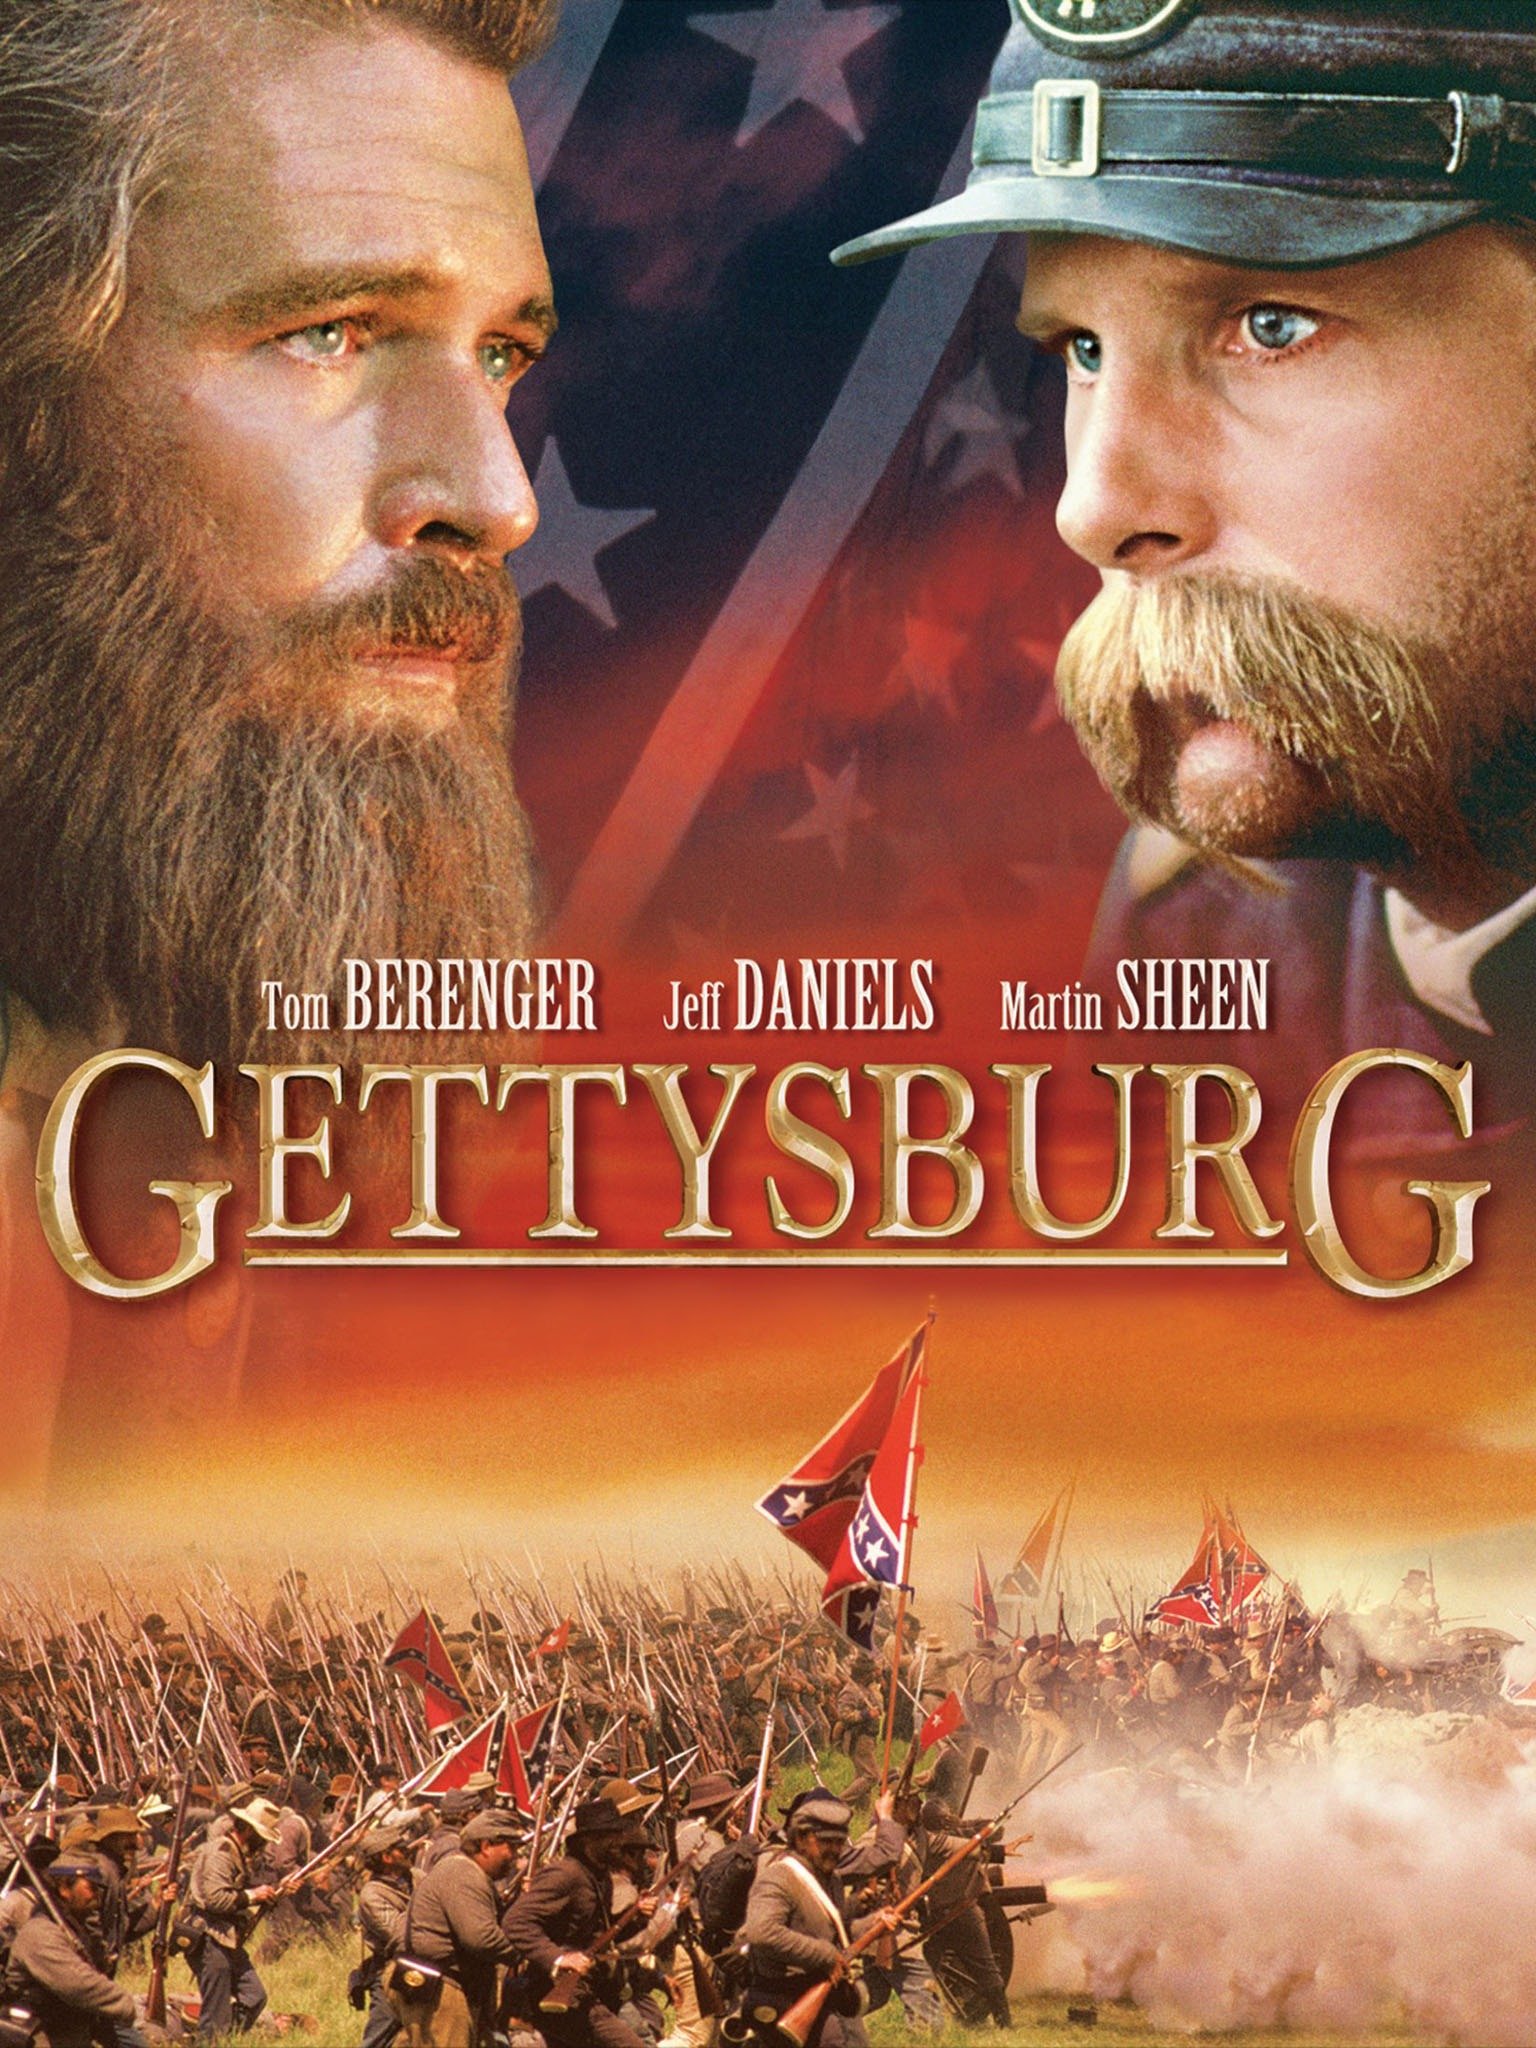 Complete Classic Movie Gettysburg (1993) Independent Film, News and